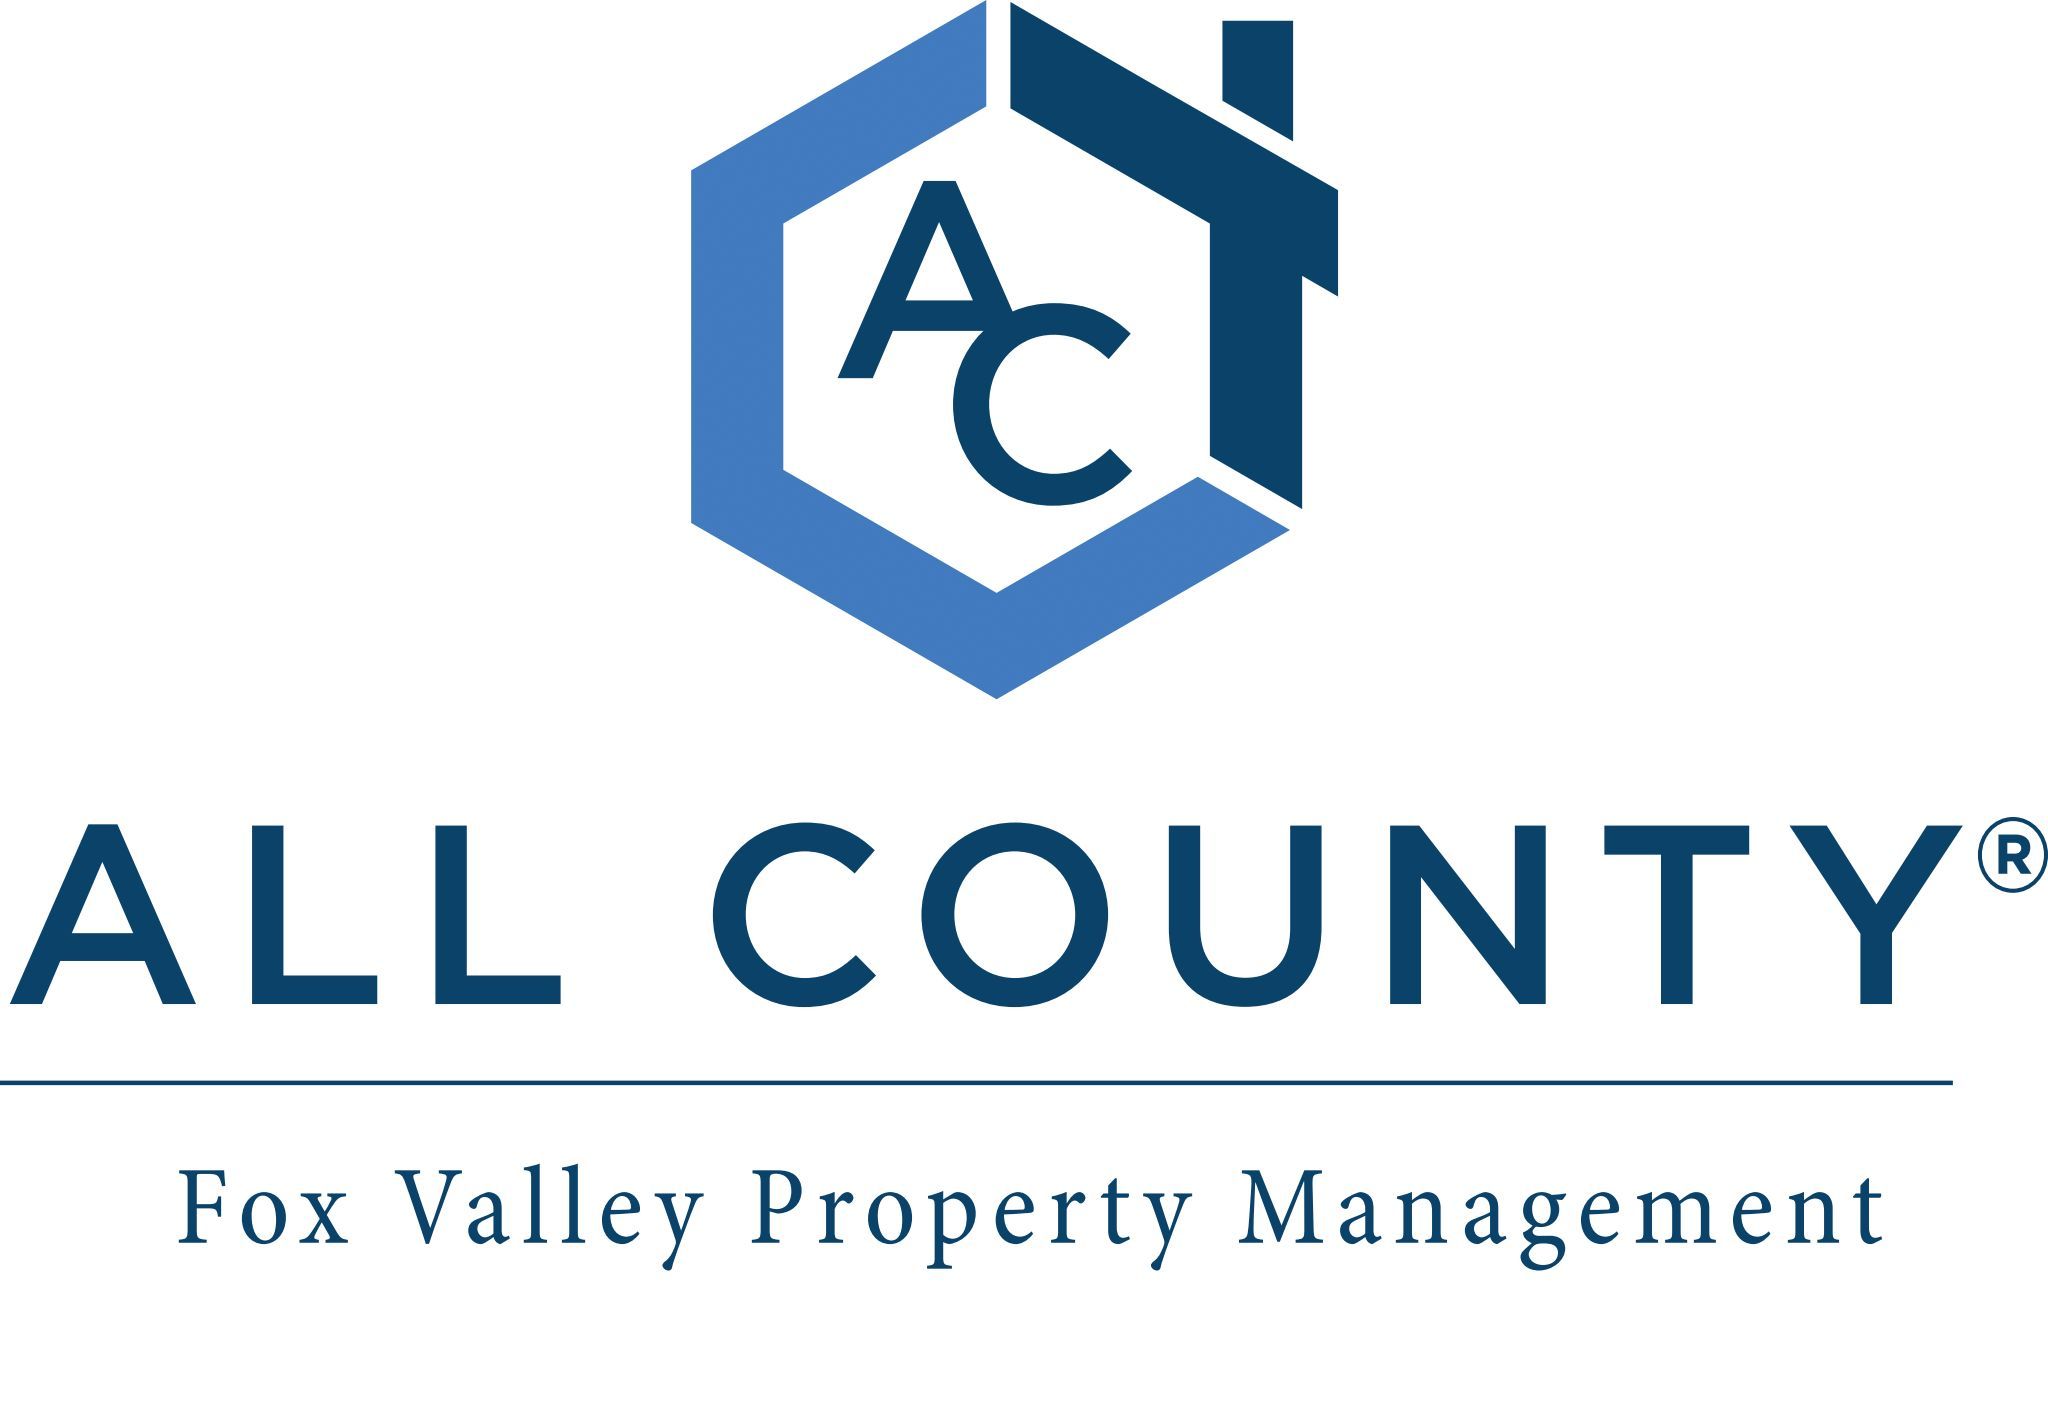 All County Fox Valley Property Management logo